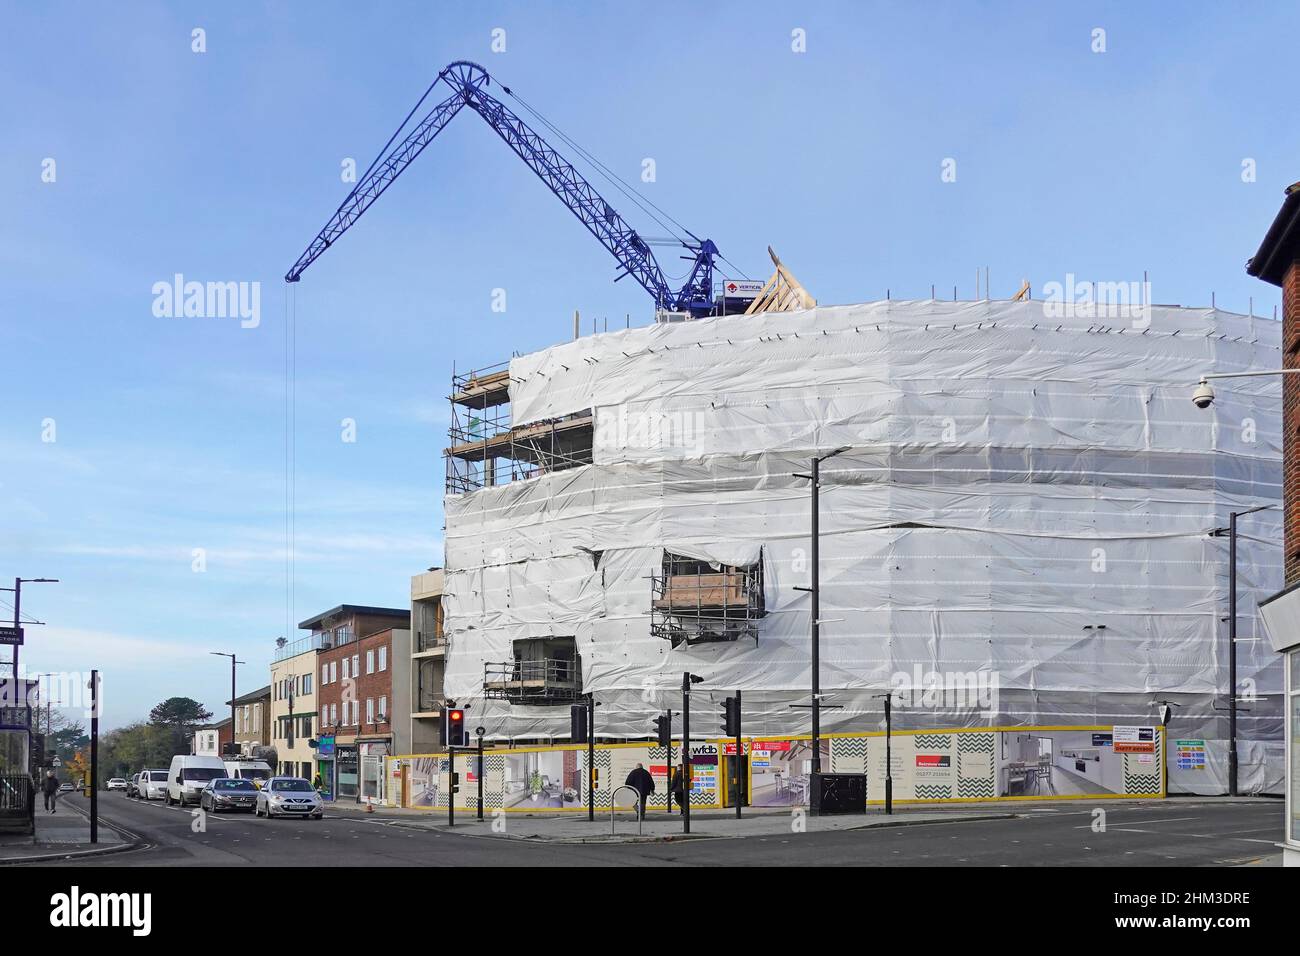 Construction site crane on prime corner plot at busy high street road junction plastic safety cocoon around scaffolding & building work Brentwood UK Stock Photo